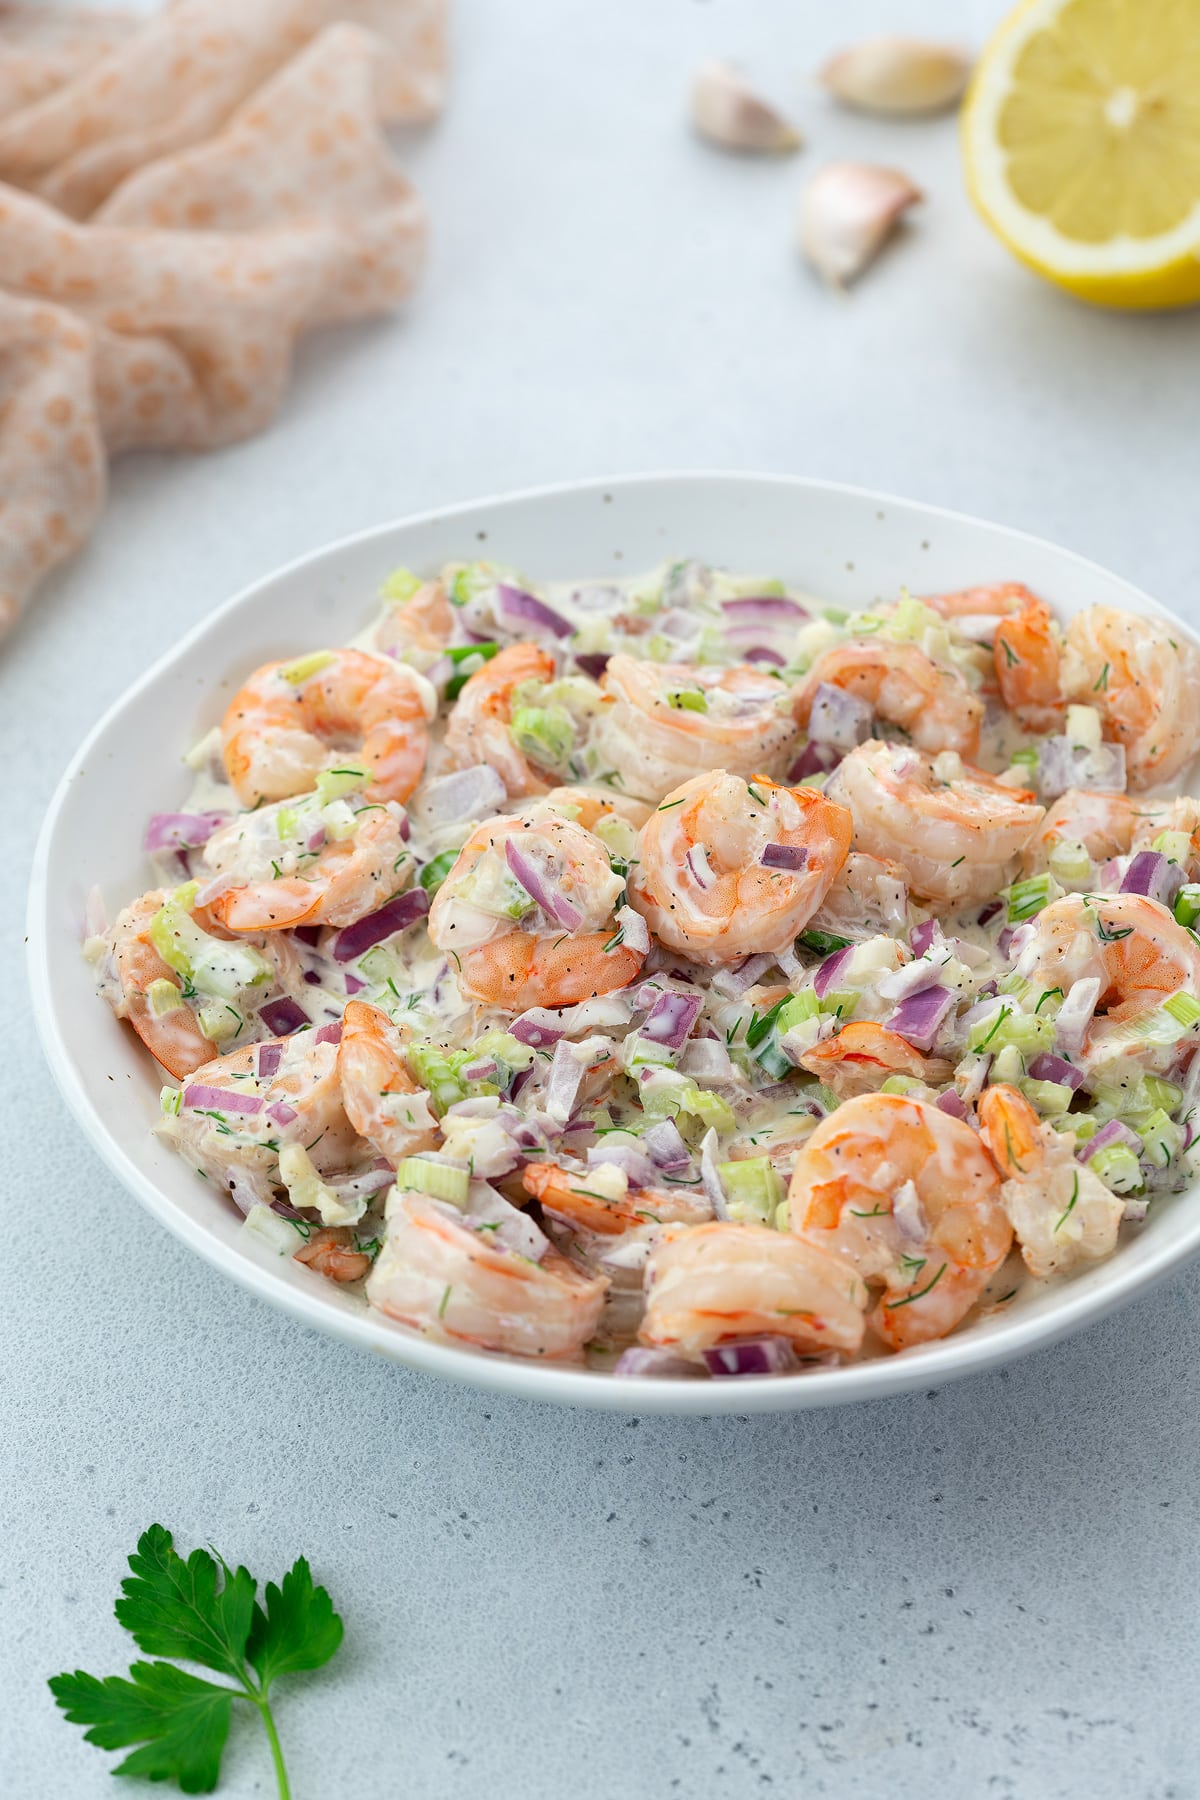 Creamy homemade shrimp salad in a white bowl on a white tabletop, surrounded by garlic cloves and a towel.